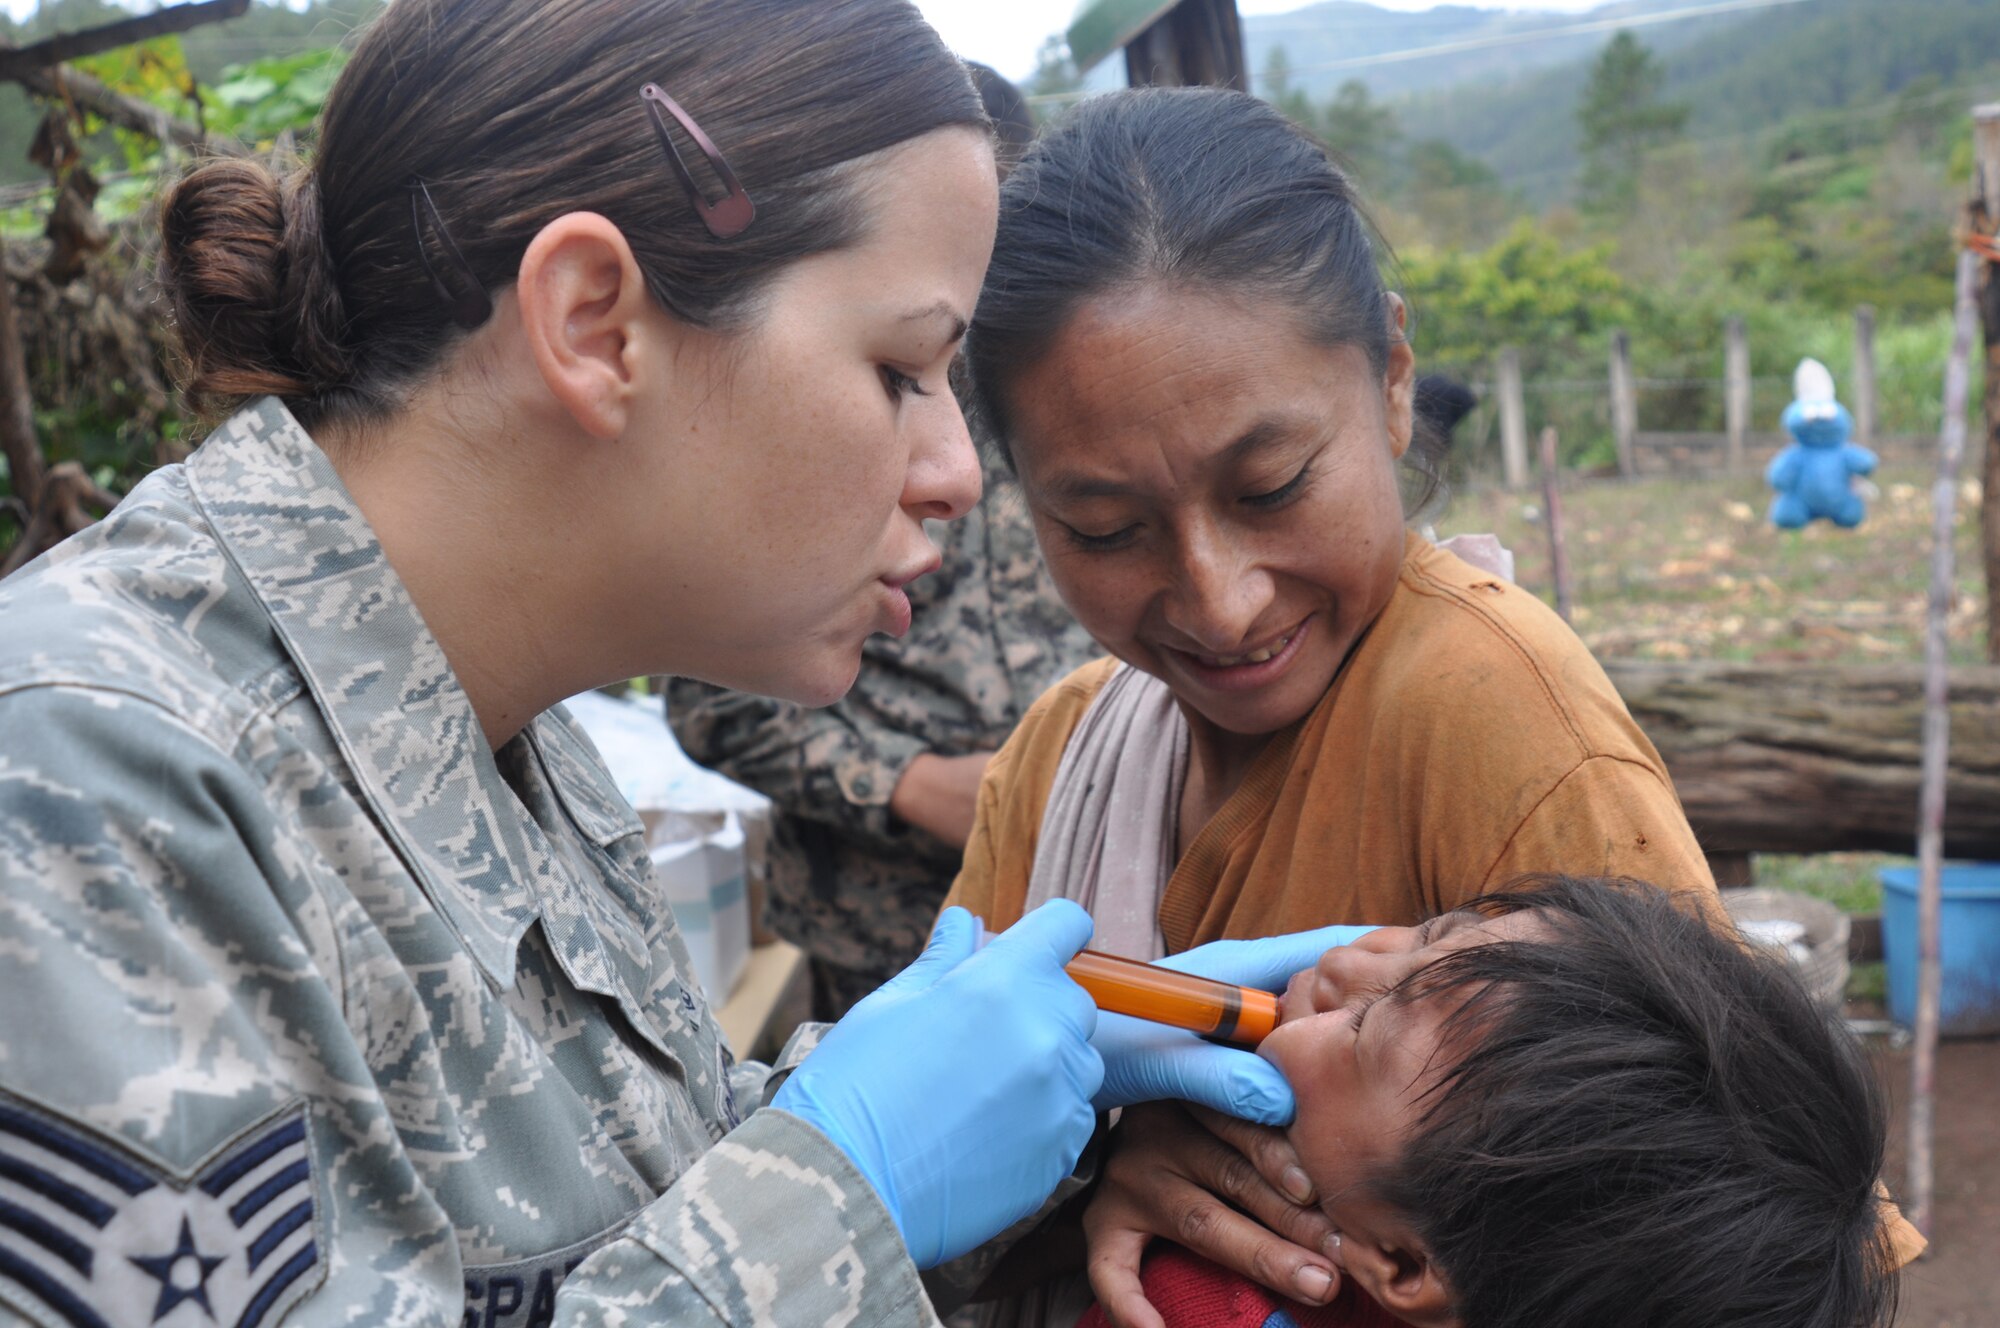 SAN JUAN, Honduras - Air Force Staff Sgt. Melissa Sparks, a Medical Element member who works in preventive medicine at Soto Cano Air Base, Honduras, gives a child de-wormer after their preventive medicine briefing on the last day of the medical readiness and training exercise March 10.  Each person received a preventive medicine briefing then proceeded to the screening area. Members from Joint Task Force-Bravo, Soto Cano Air Base, Honduras, saw more than 1,000 villagers during the four-day medical readiness and training exercise in the Montana de la Flor region March 7-10. (U.S. Air Force photo/Capt. Candice Allen)